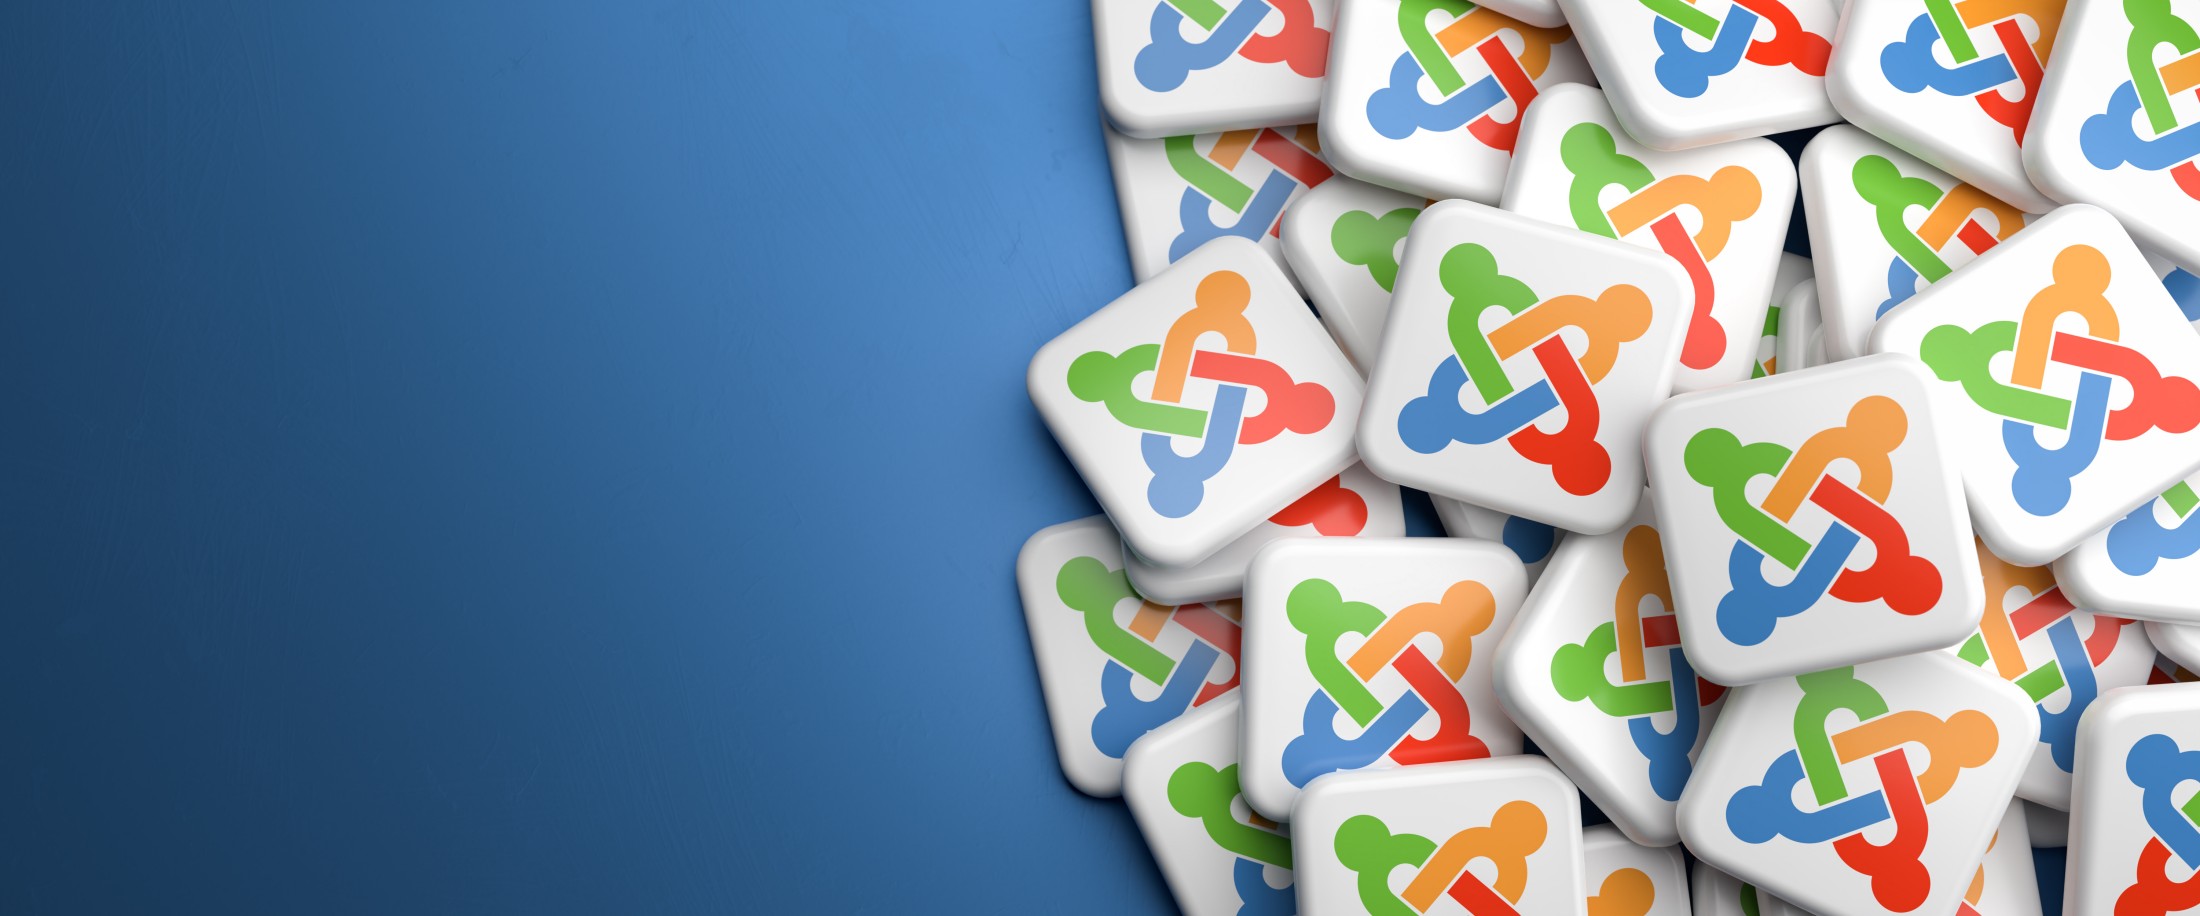 Joomla SEO Strategies for Increased Visibility and Engagement